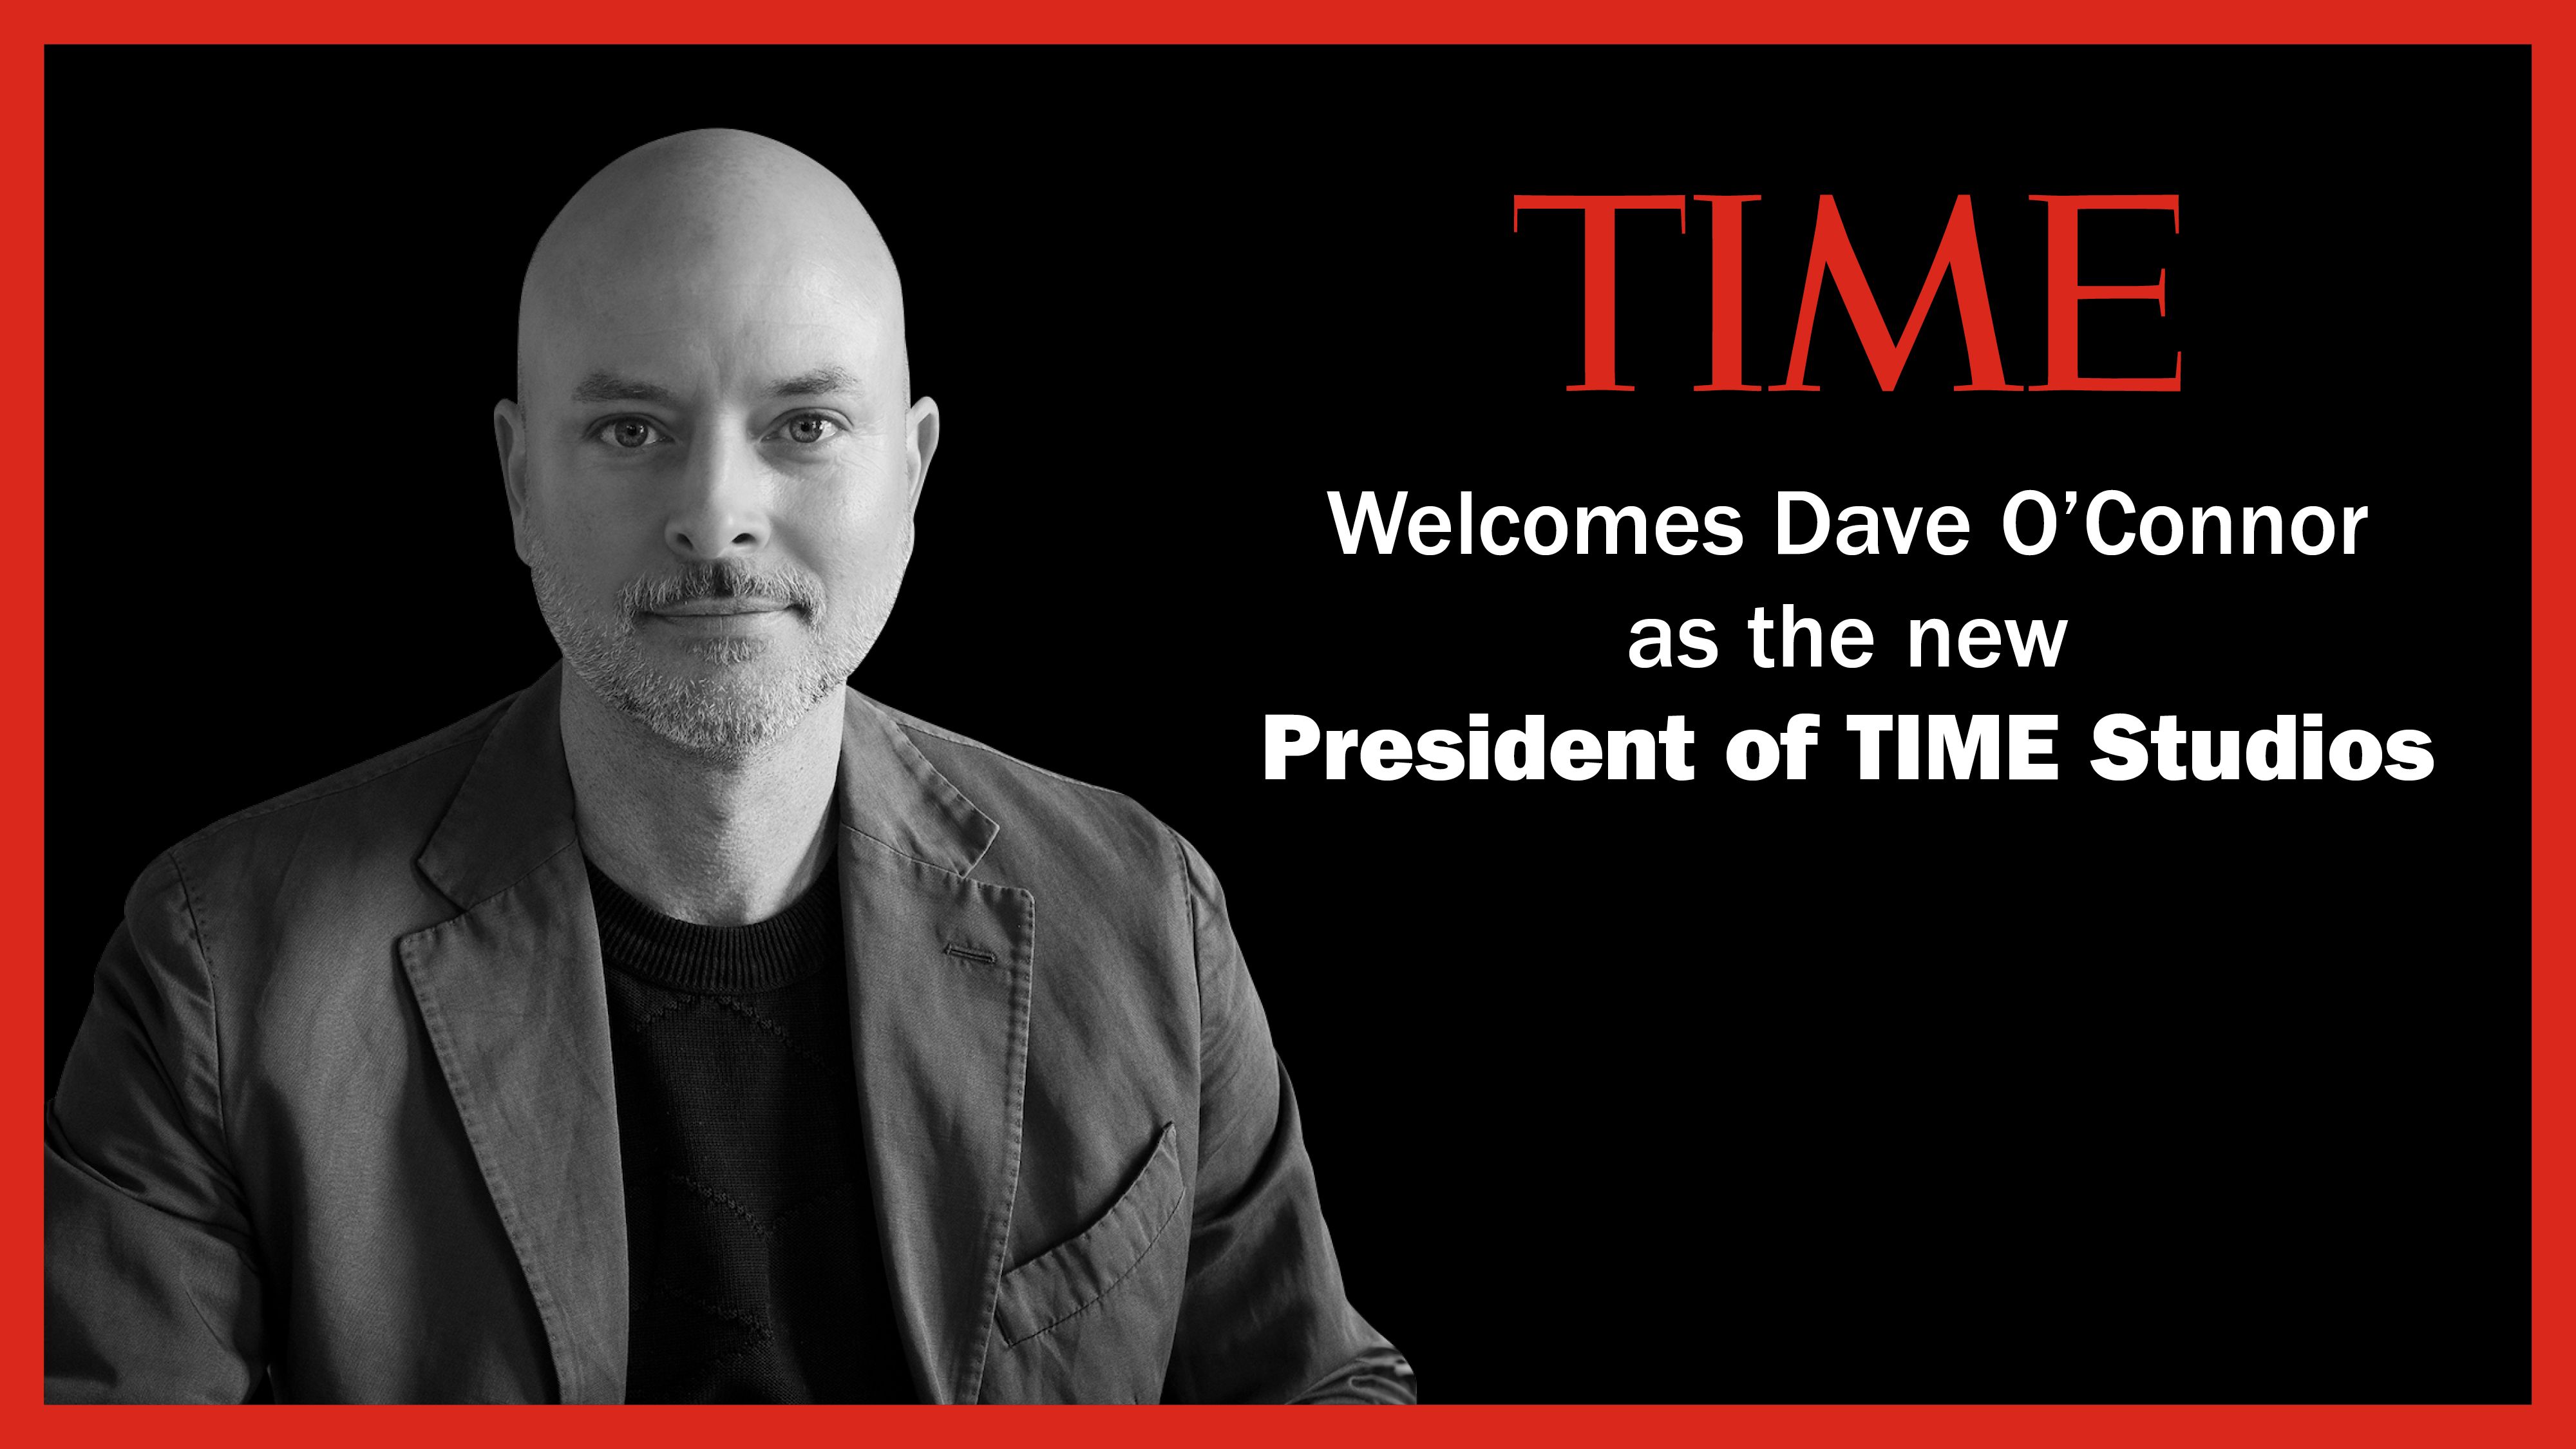 Dave O’Connor Named President of TIME Studios
                      
                      
                        By TIME PR